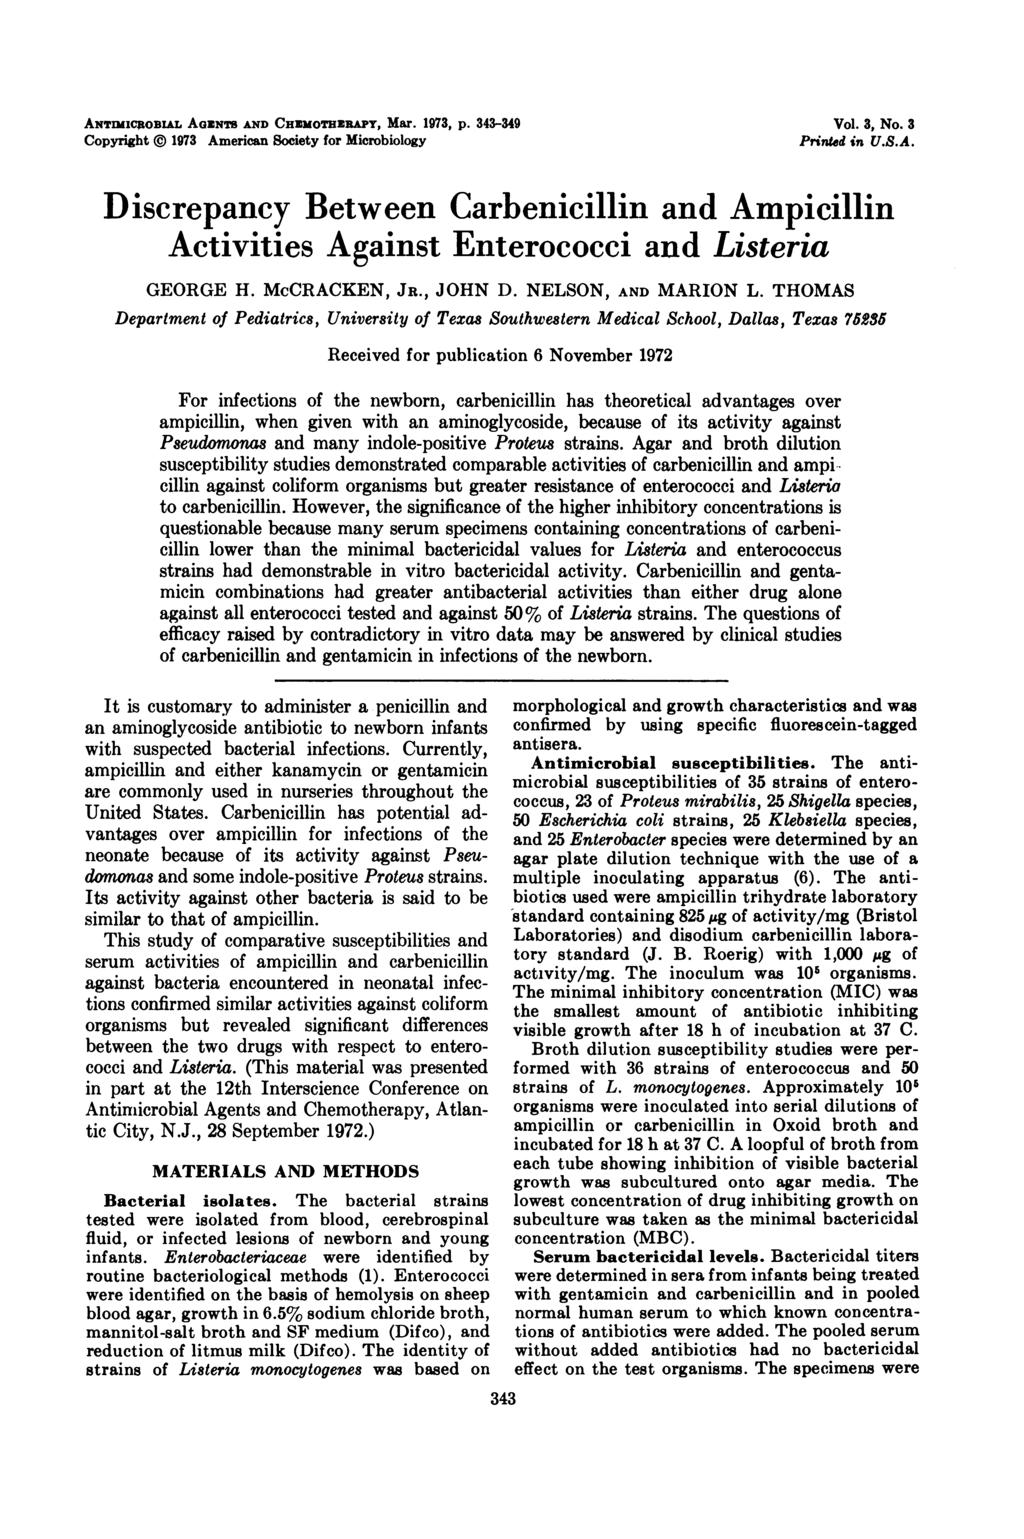 ANTMCROBAL AGENTS AND CHEMOTHEAPY, Mar. 193, p. 3339 Copyright 193 American Society for Microbiology Vol. 3, No. 3 Printed in U.S.A. Discrepancy Between Carbenicillin and Ampicillin Activities Against Enterococci and Listeria GEORGE H.